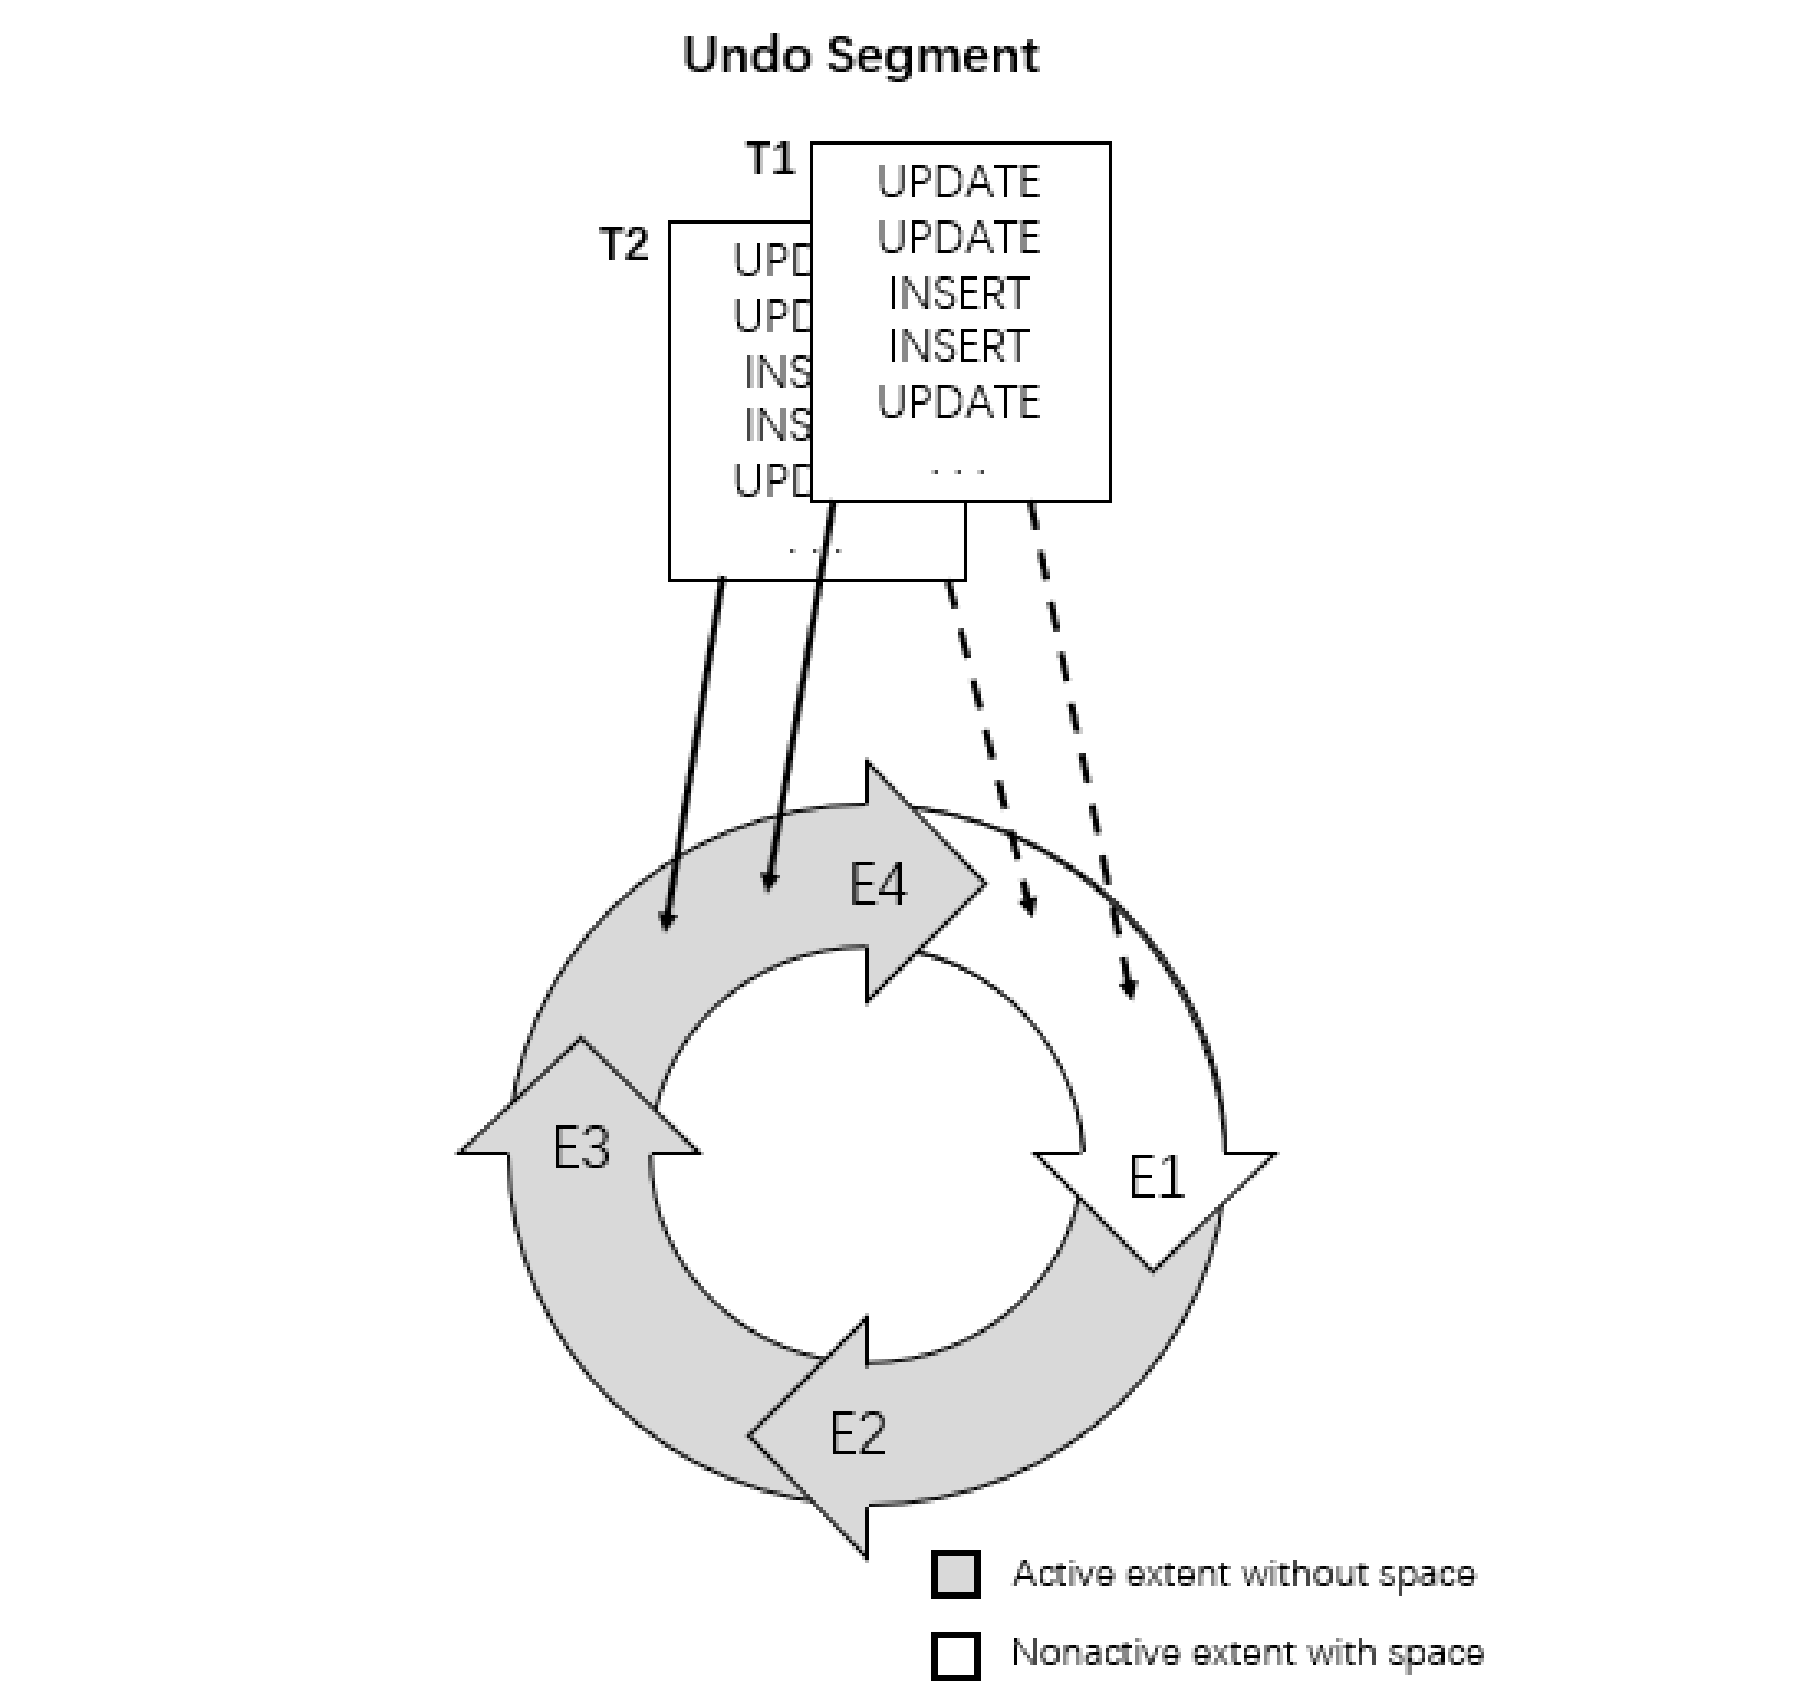 Figure 2 Cyclical Use of Allocated Extents in an Undo Segment